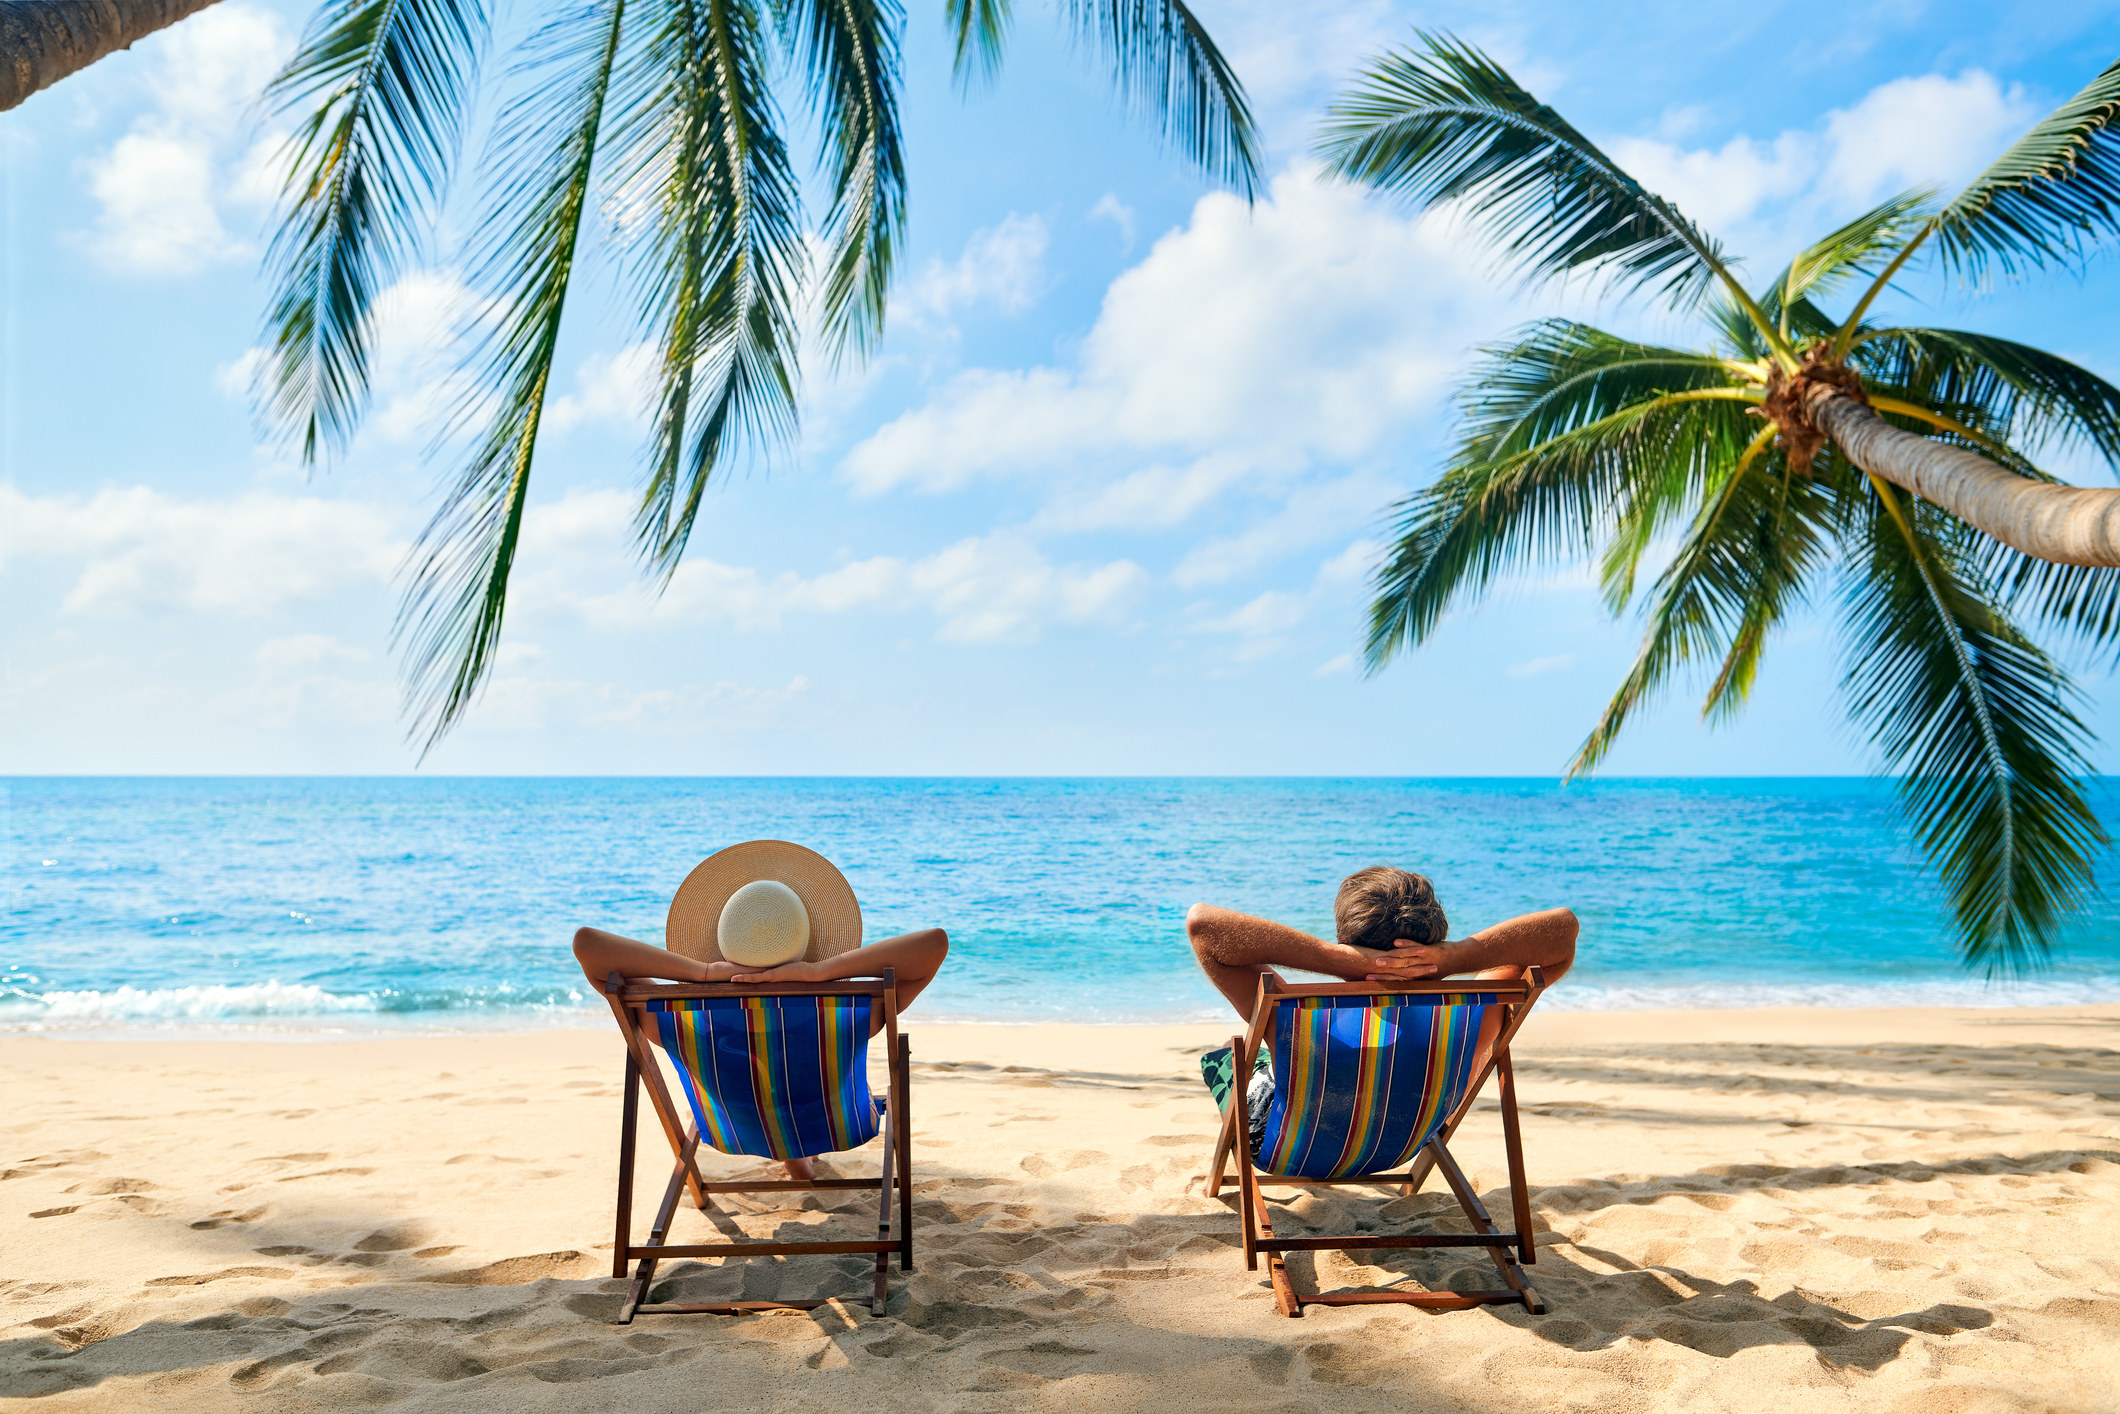 Two people relaxing in beach chairs by the sea, under palm trees